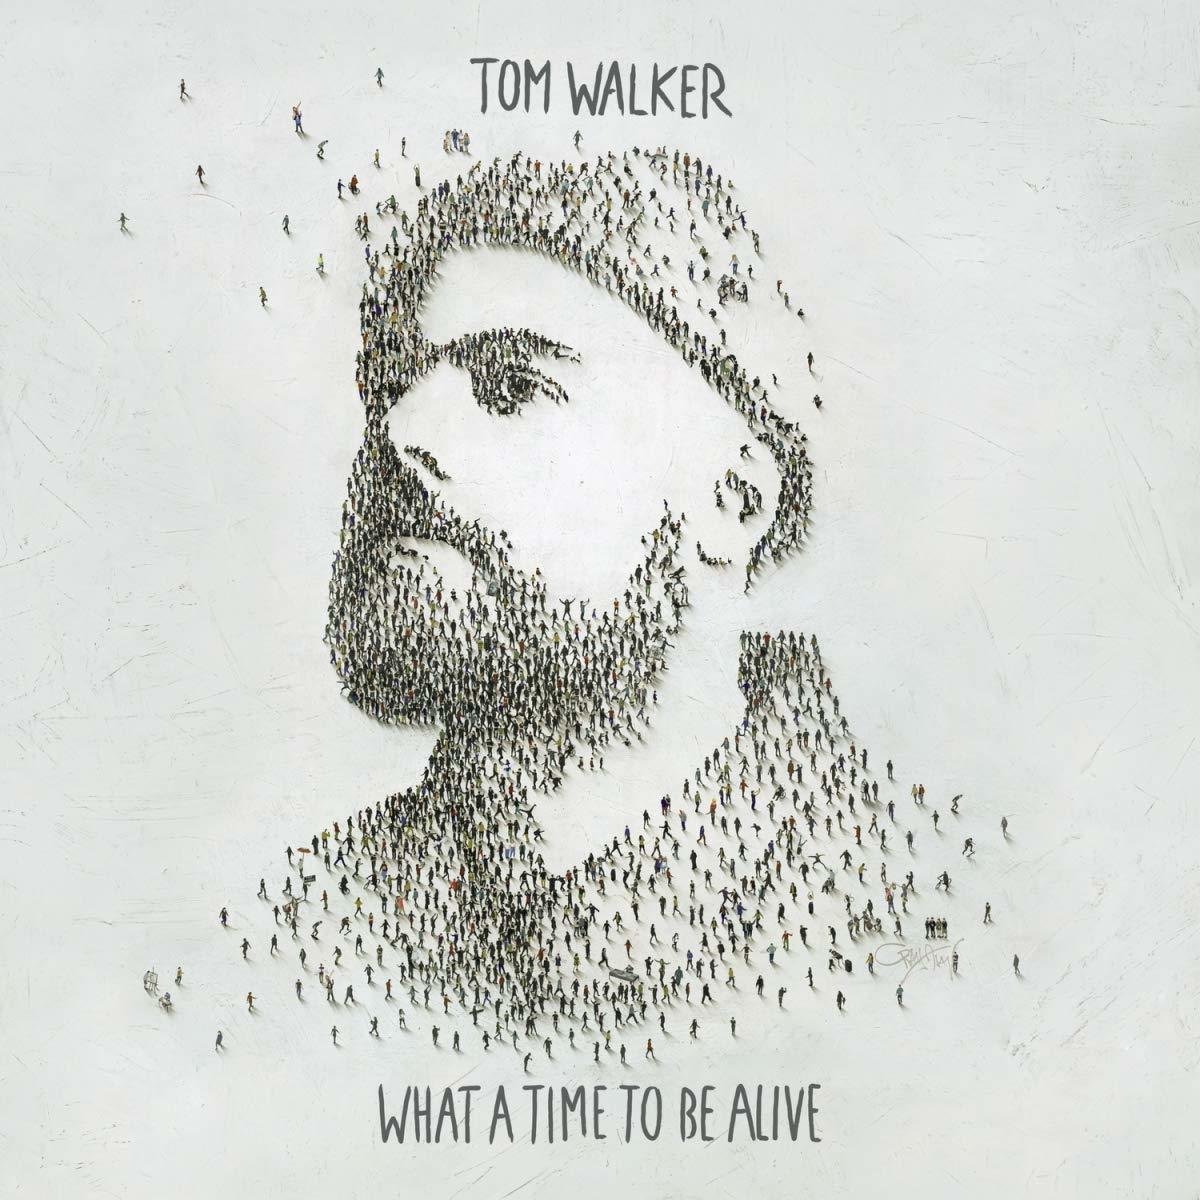 Vinylplade Tom Walker - What a Time To Be Alive (LP)